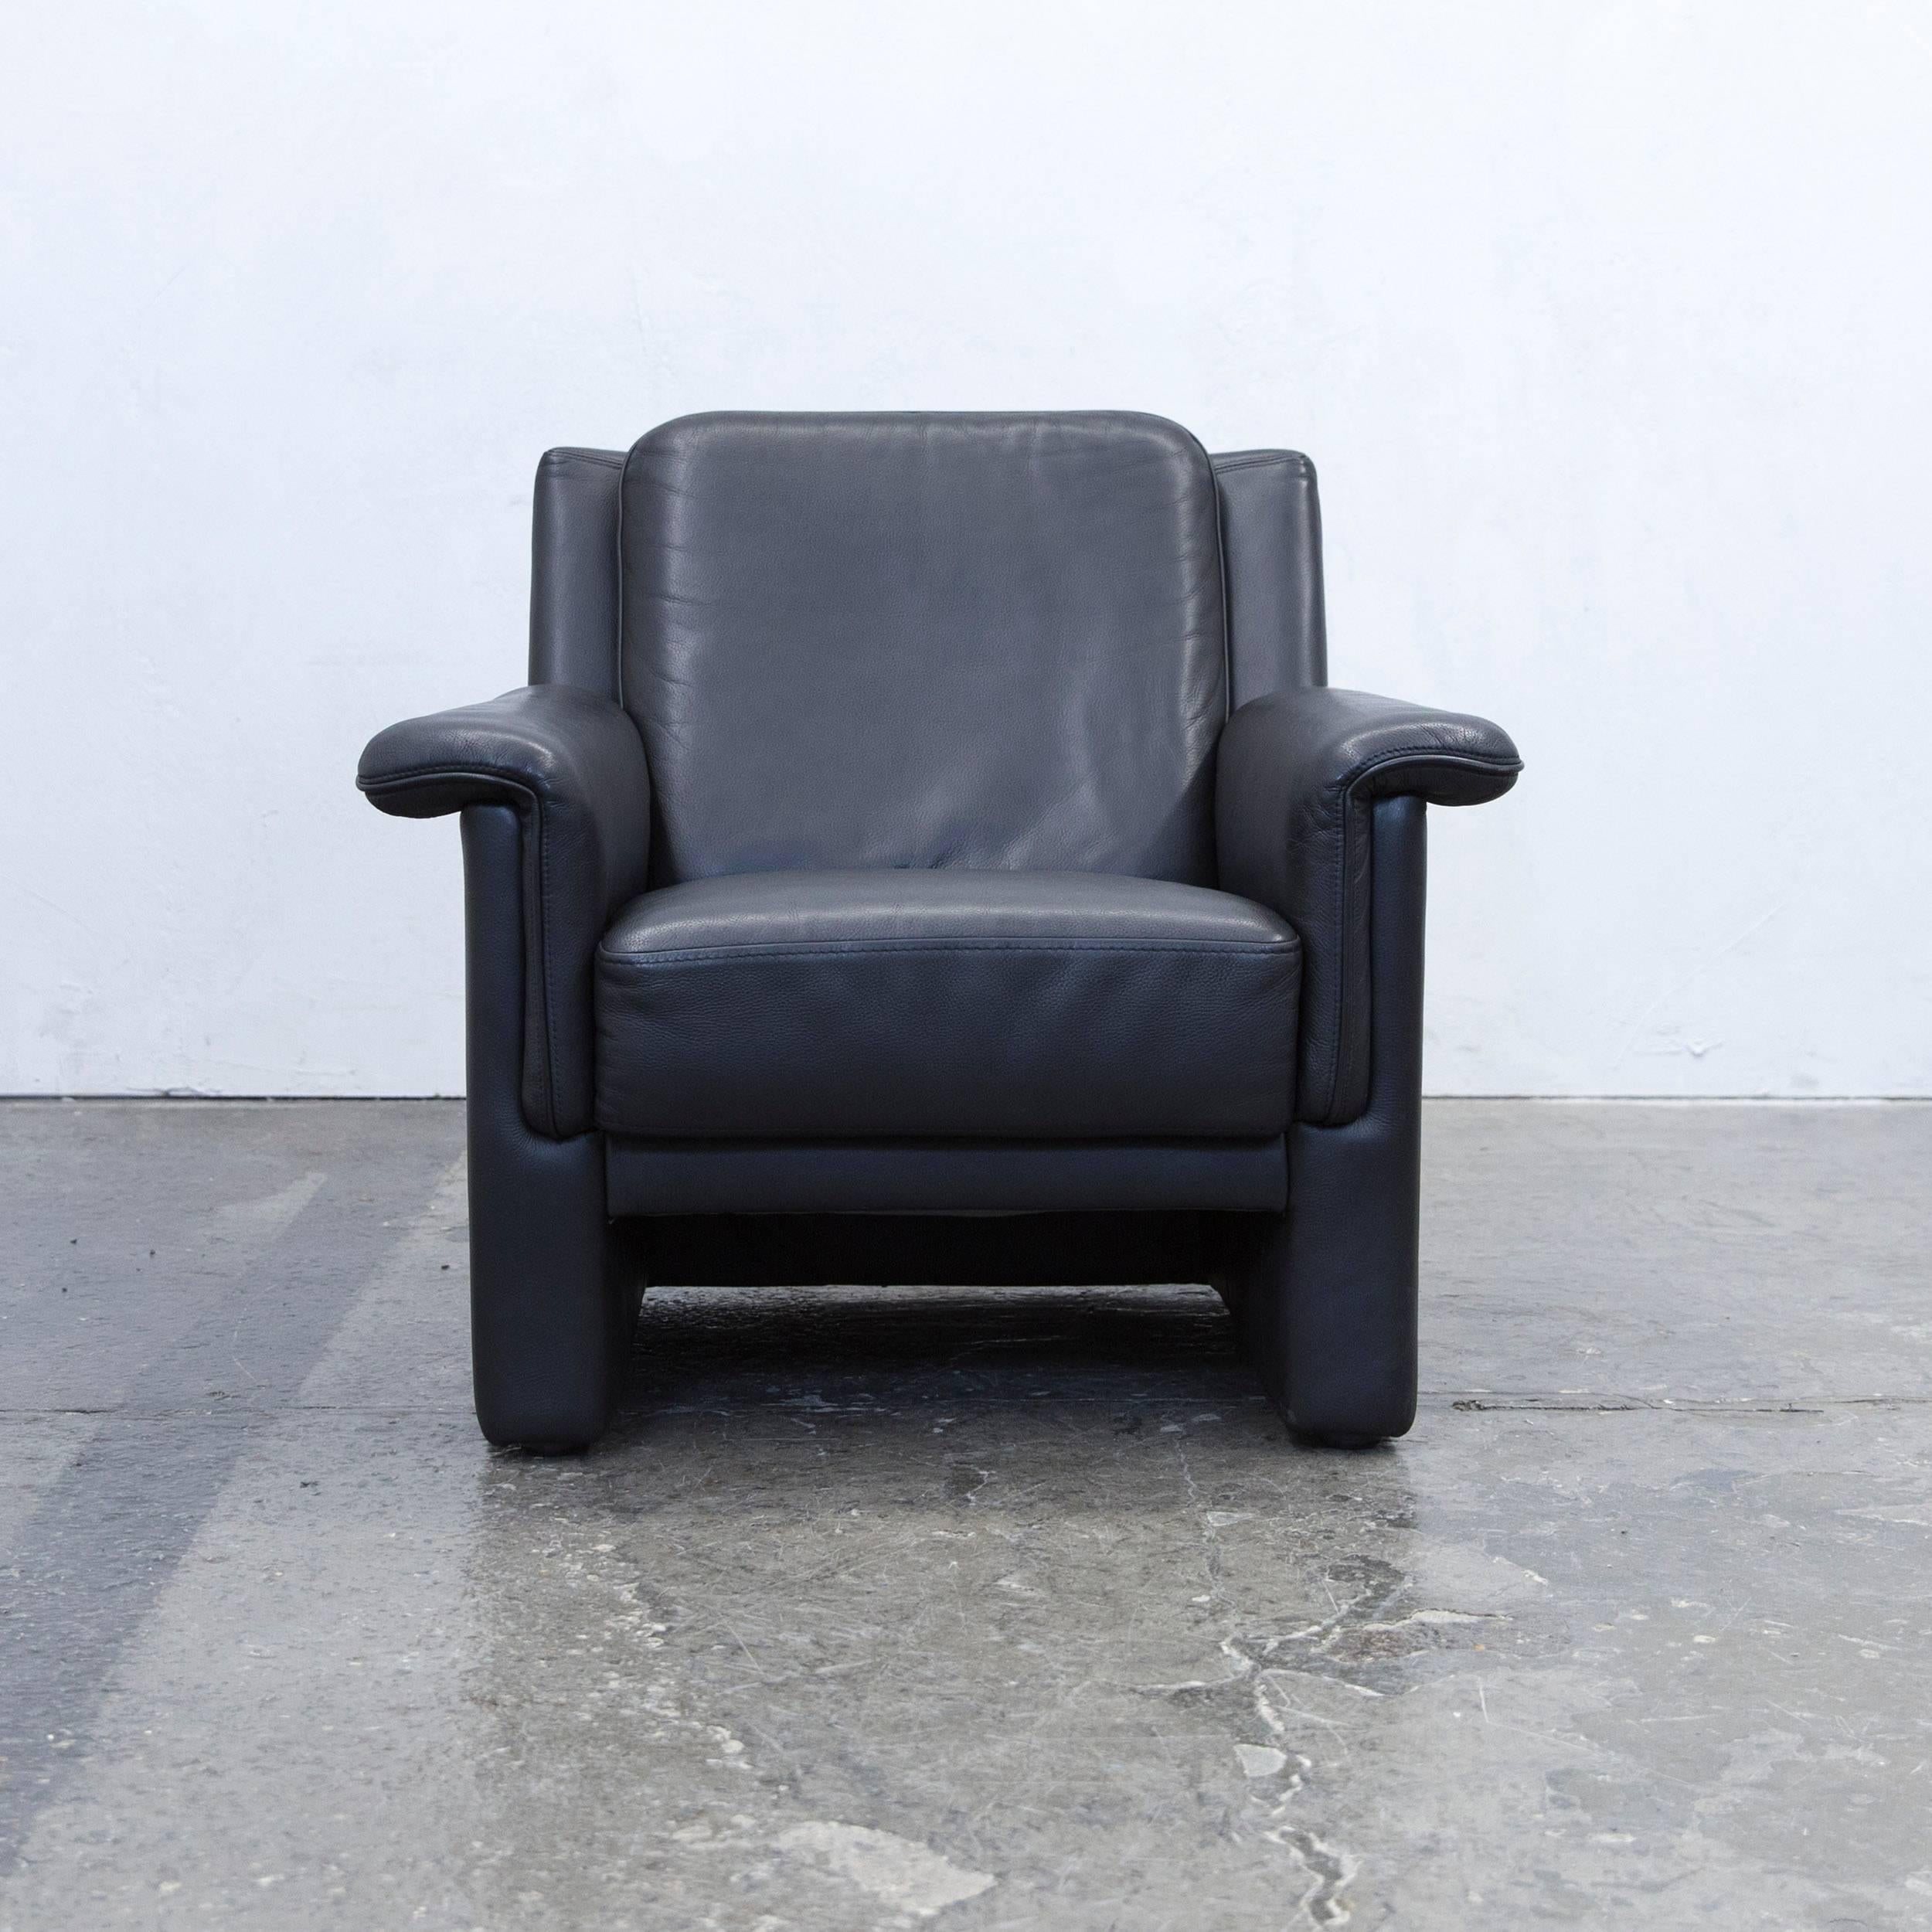 Black colored original Brühl & Sippold designer leather armchair in a minimalistic and modern design, made for pure comfort.